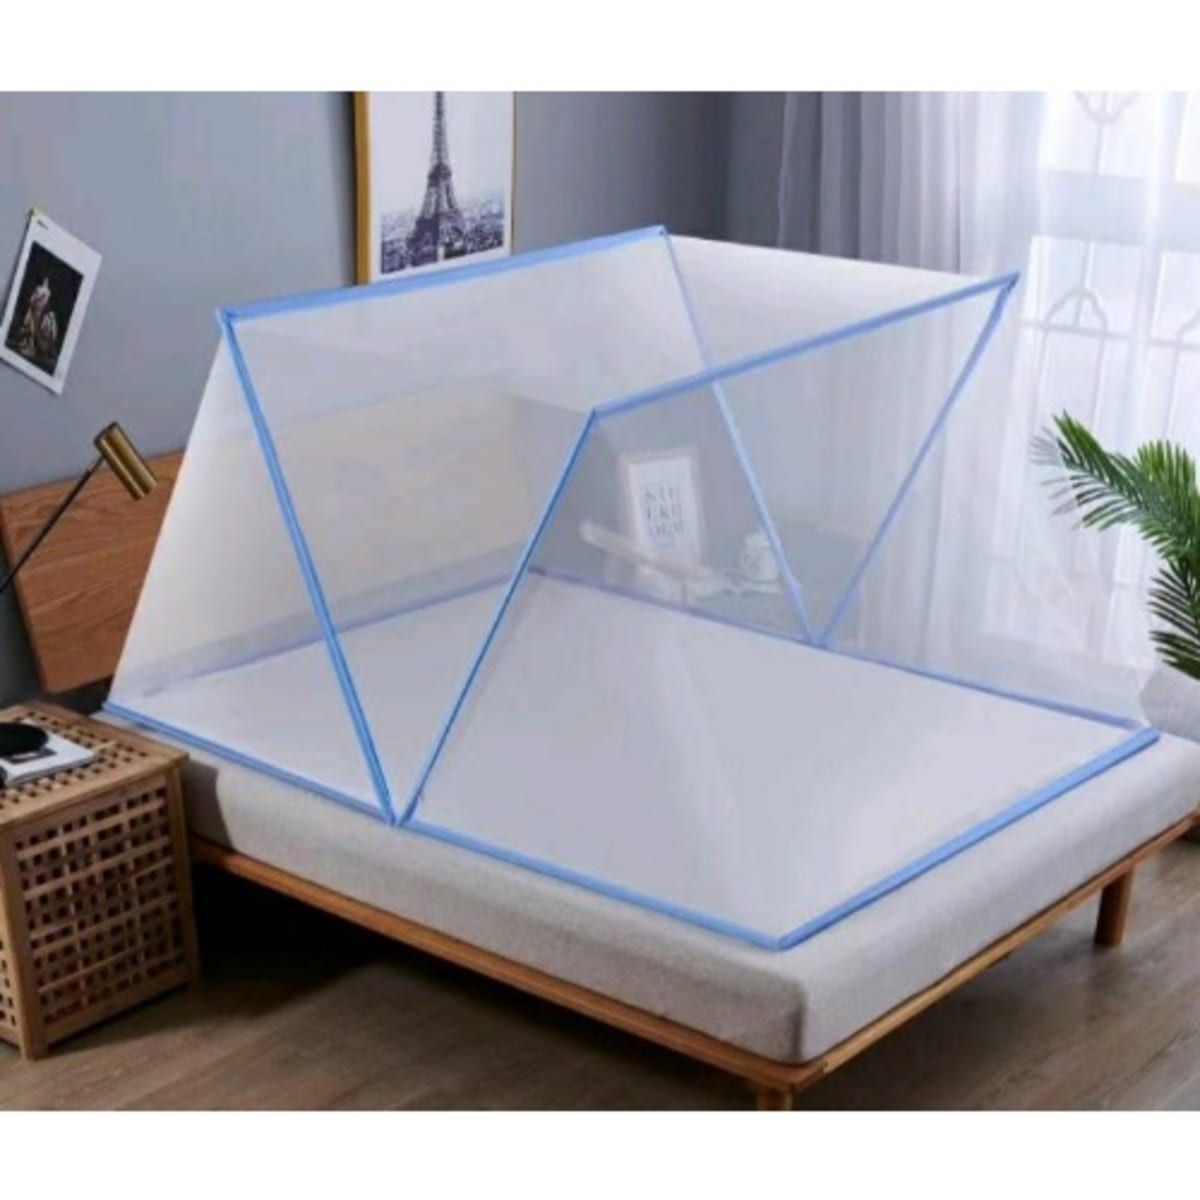 Collapsible Portable Mosquito Net - 213cm X 145cm - 7ft X 7ft Bed